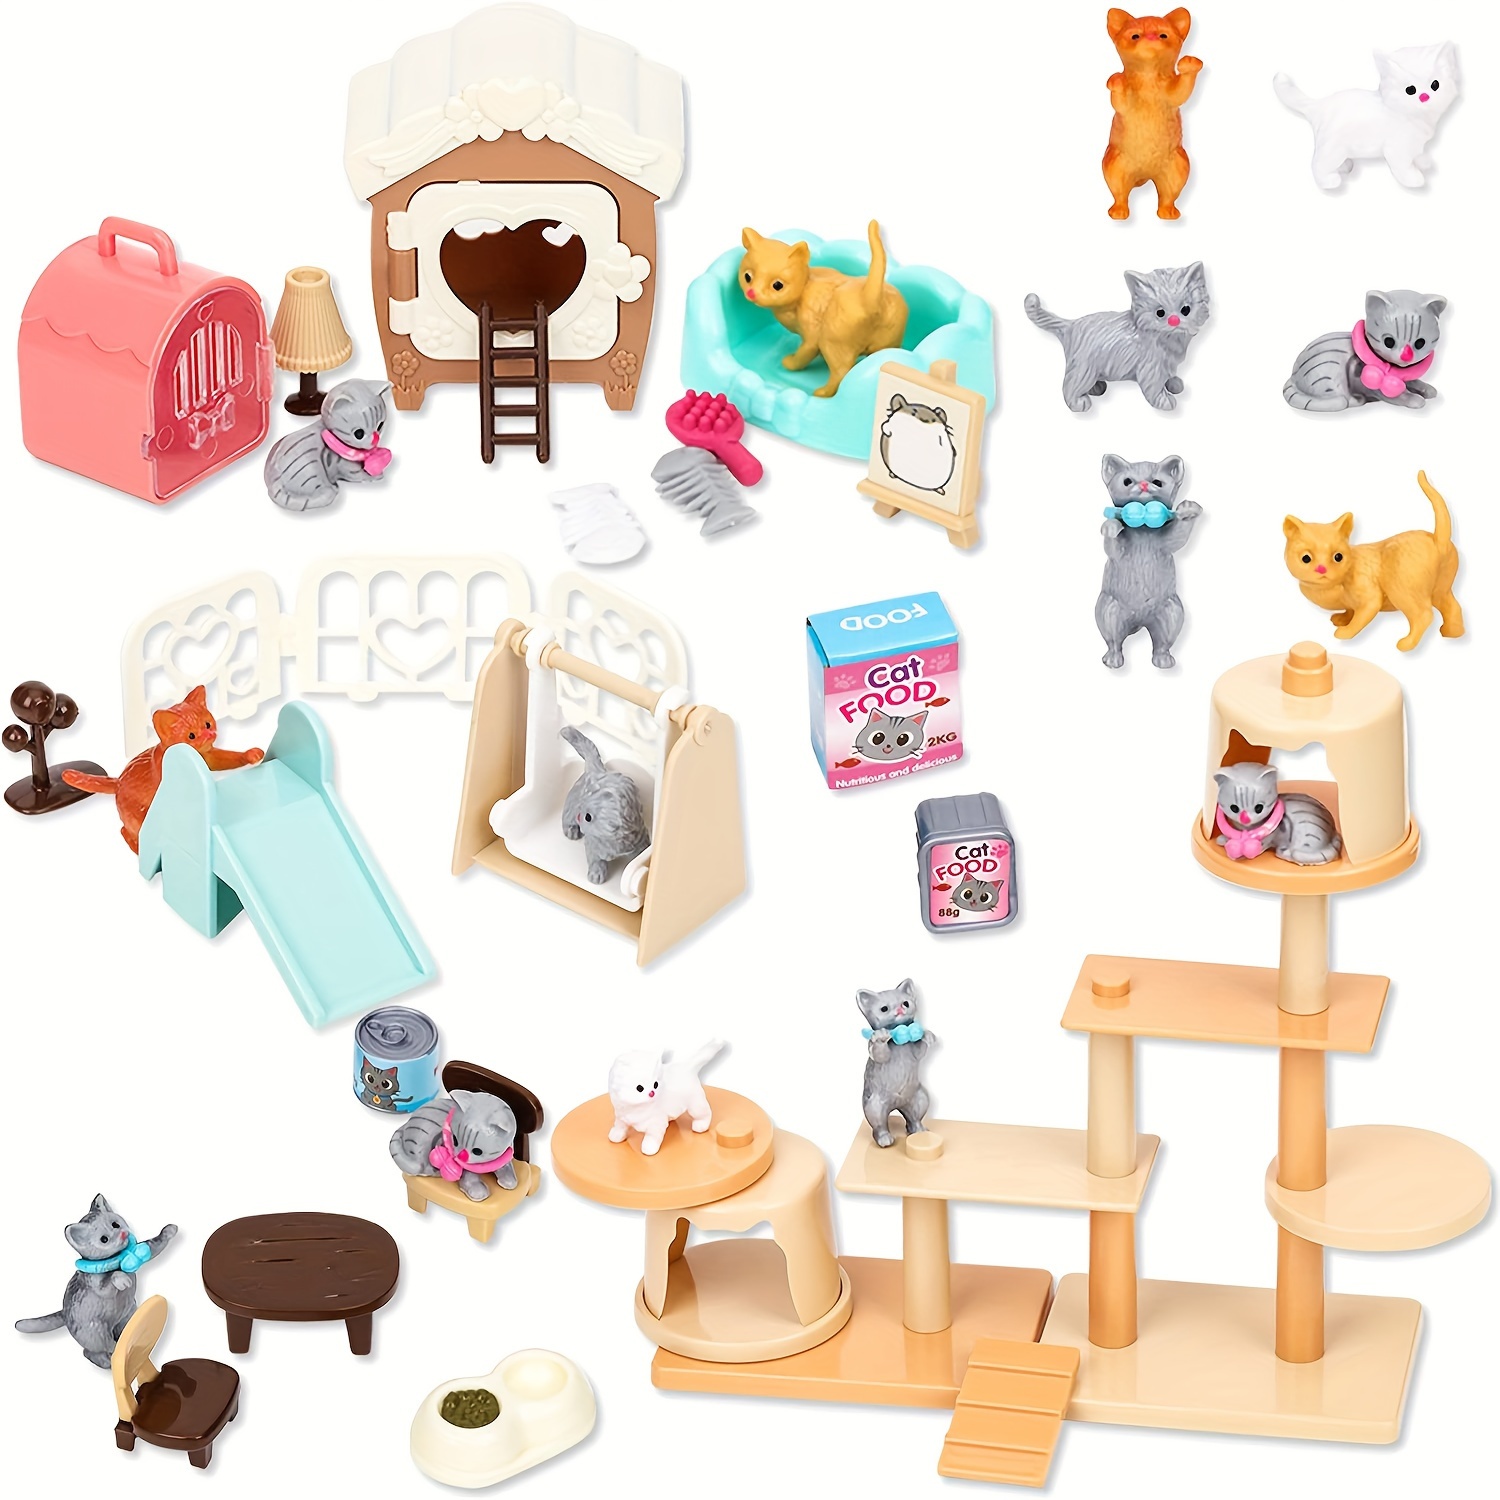 

Cat Toys Pretend Play Cat Figures Playset Toy Interactive Kitten Role Play Set Realistic Cats Care Center For Girls Boys Birthday Gift